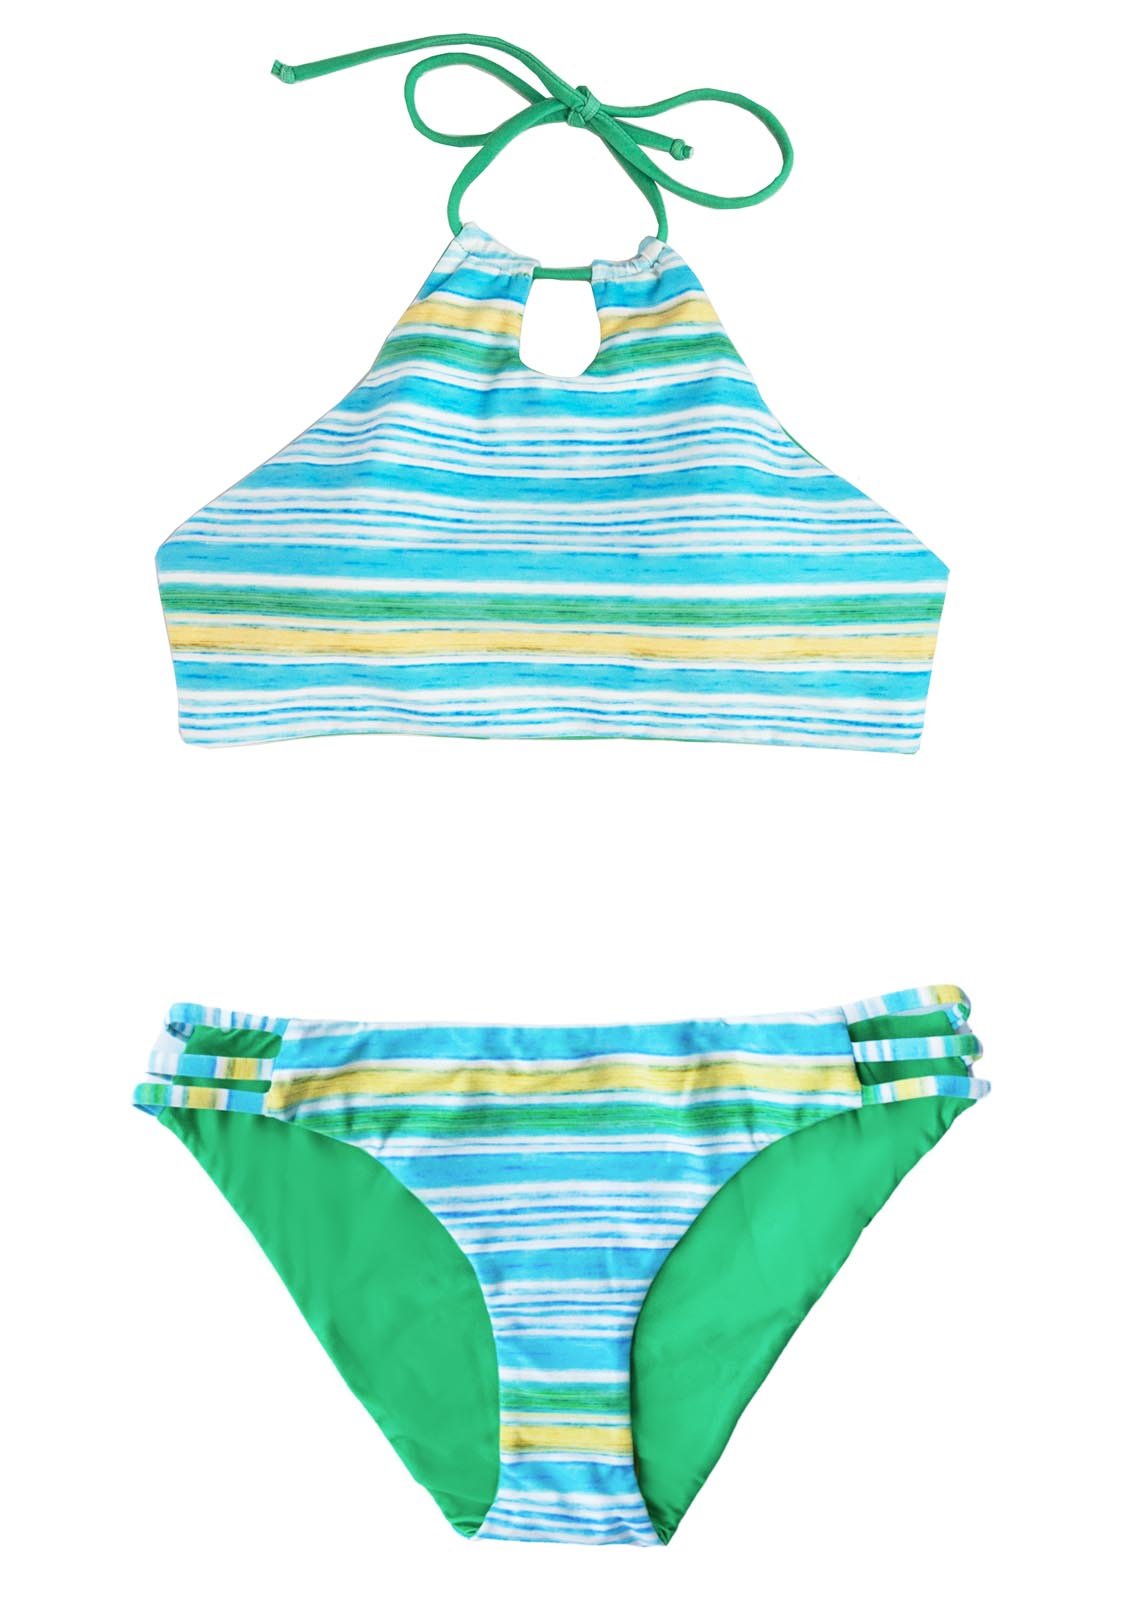 Teen swimwear two-piece bikini Yellow, Blue, Green with Halter Top and Full Coverage bottoms by Chance Loves